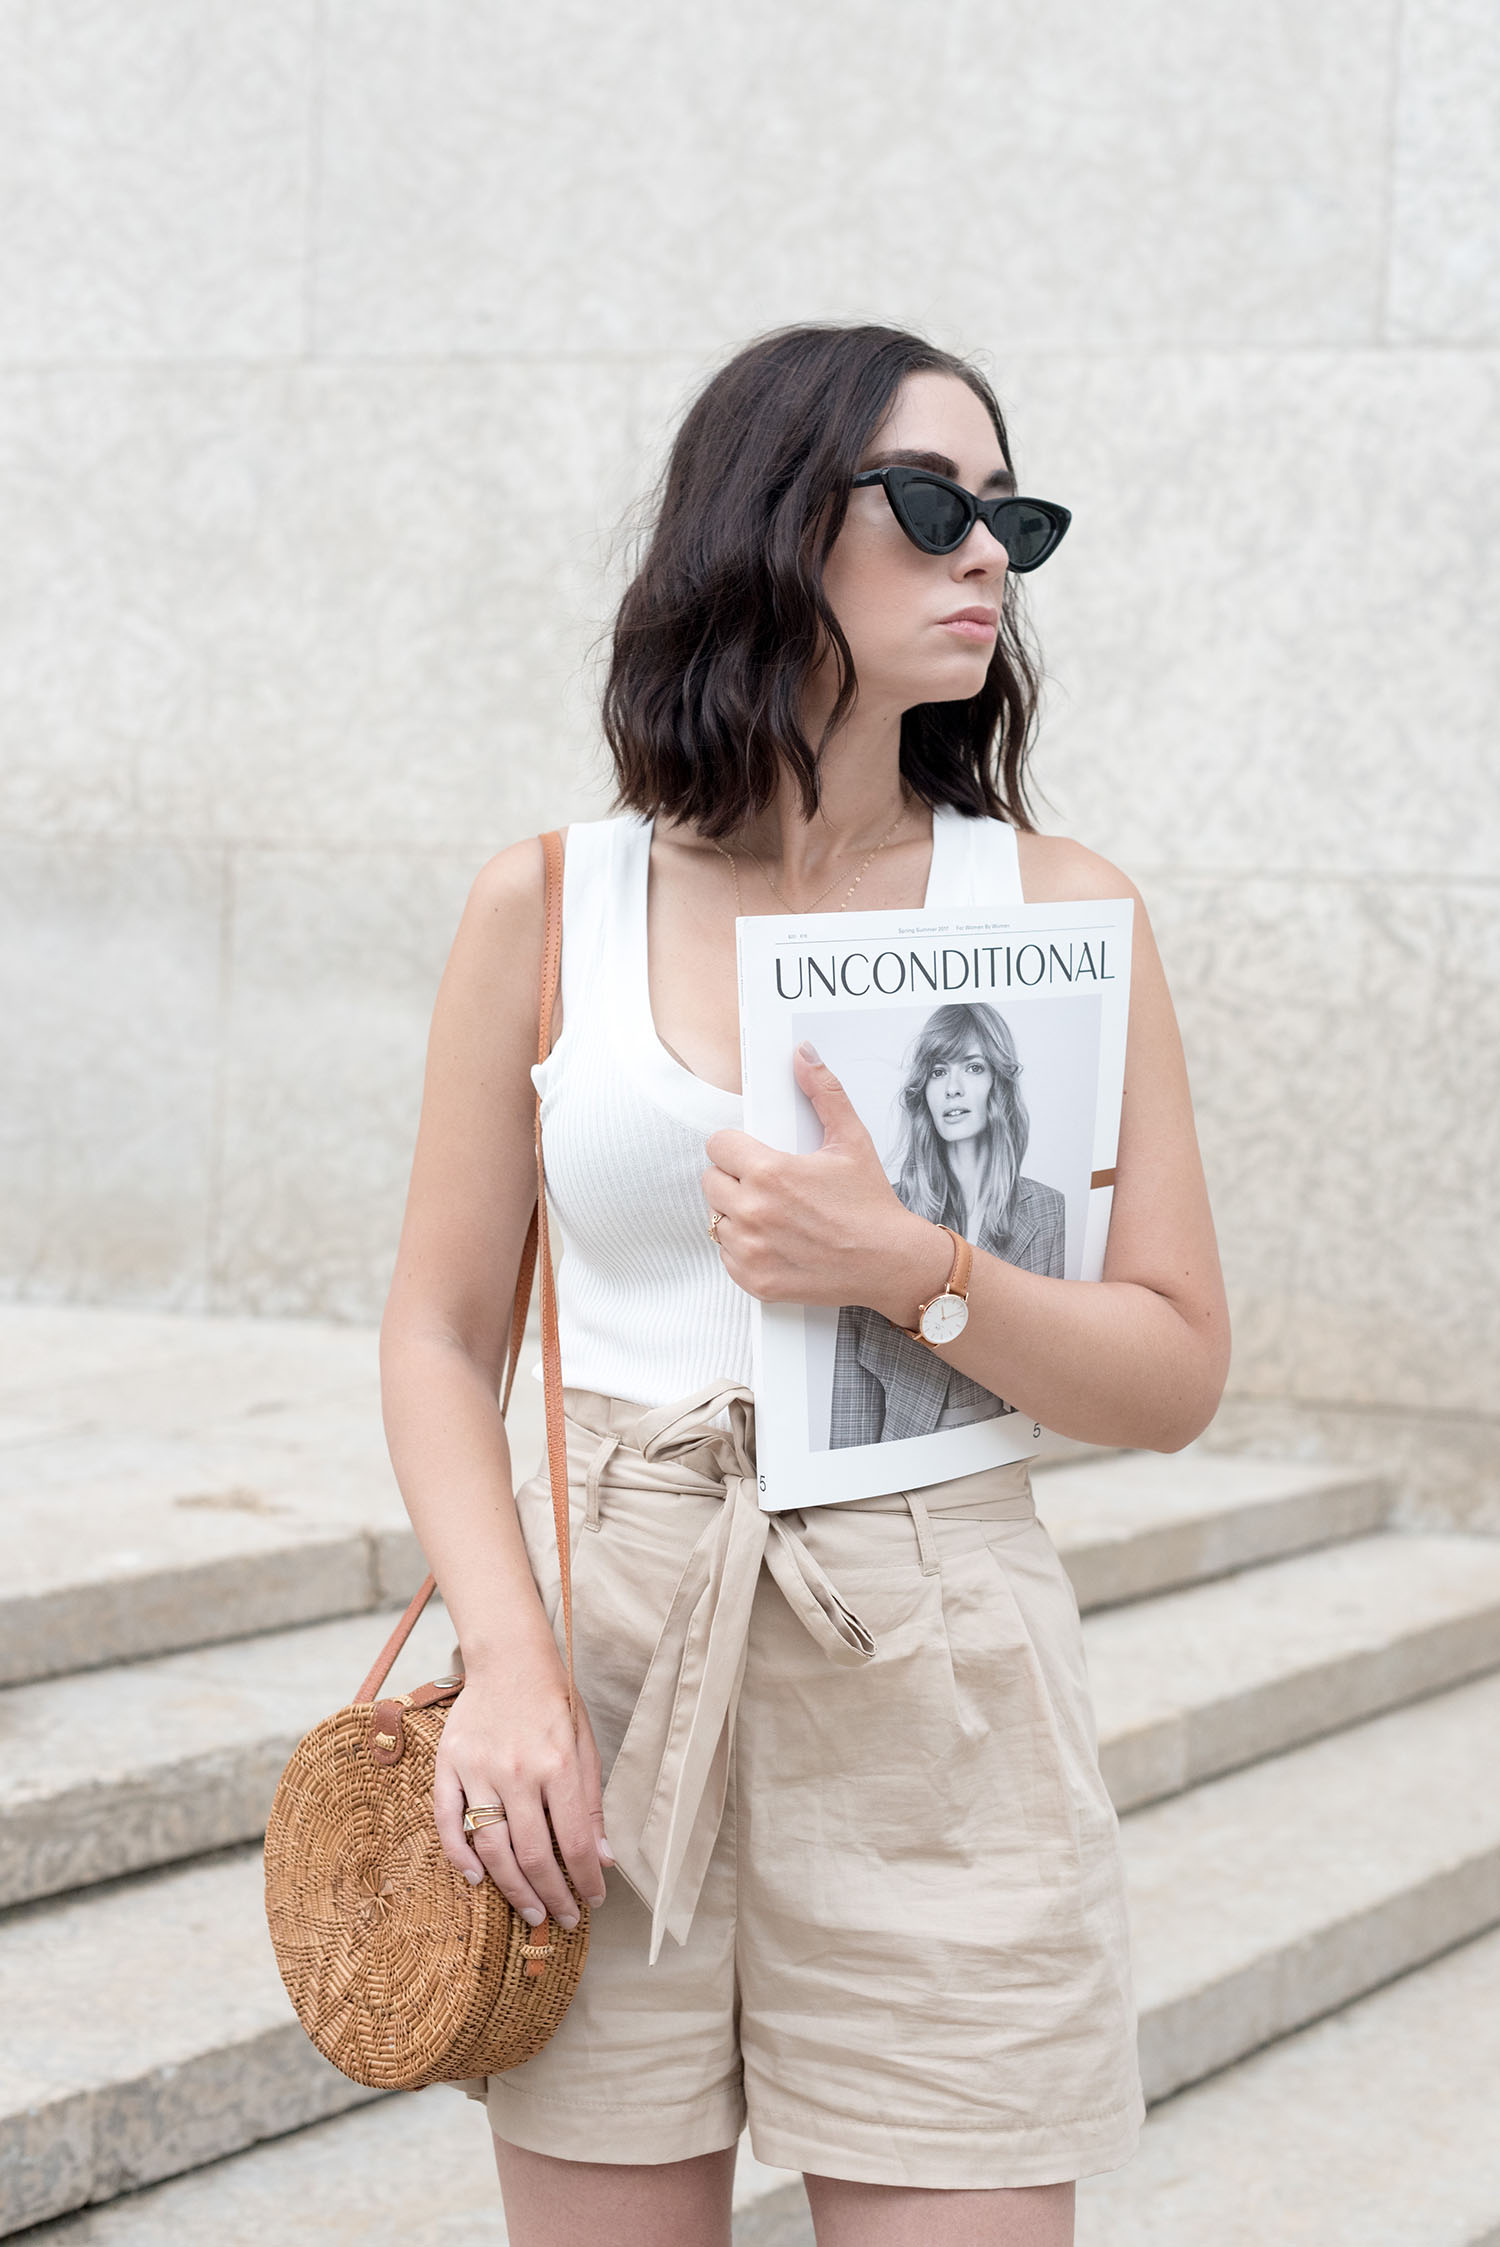 Portrait of top Canadian style blogger Cee Fardoe of Coco & Vera wearing Zara cat eye sunglasses and carrying a copy of Unconditional magazine